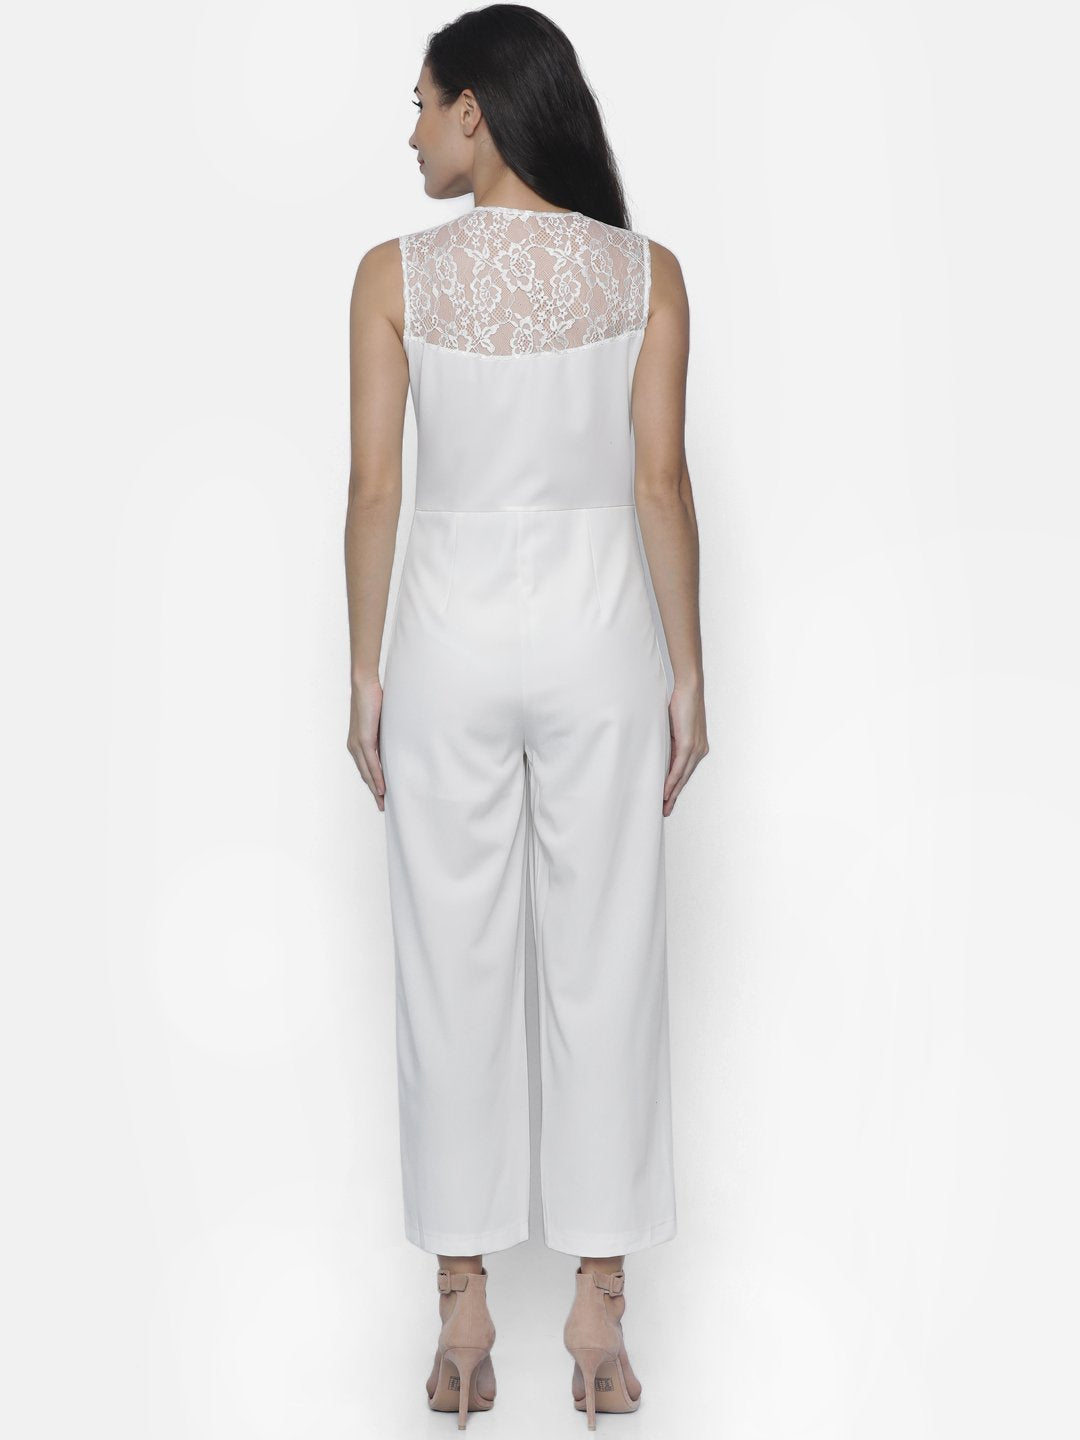 IS.U White Jumpsuit With Lace Detail